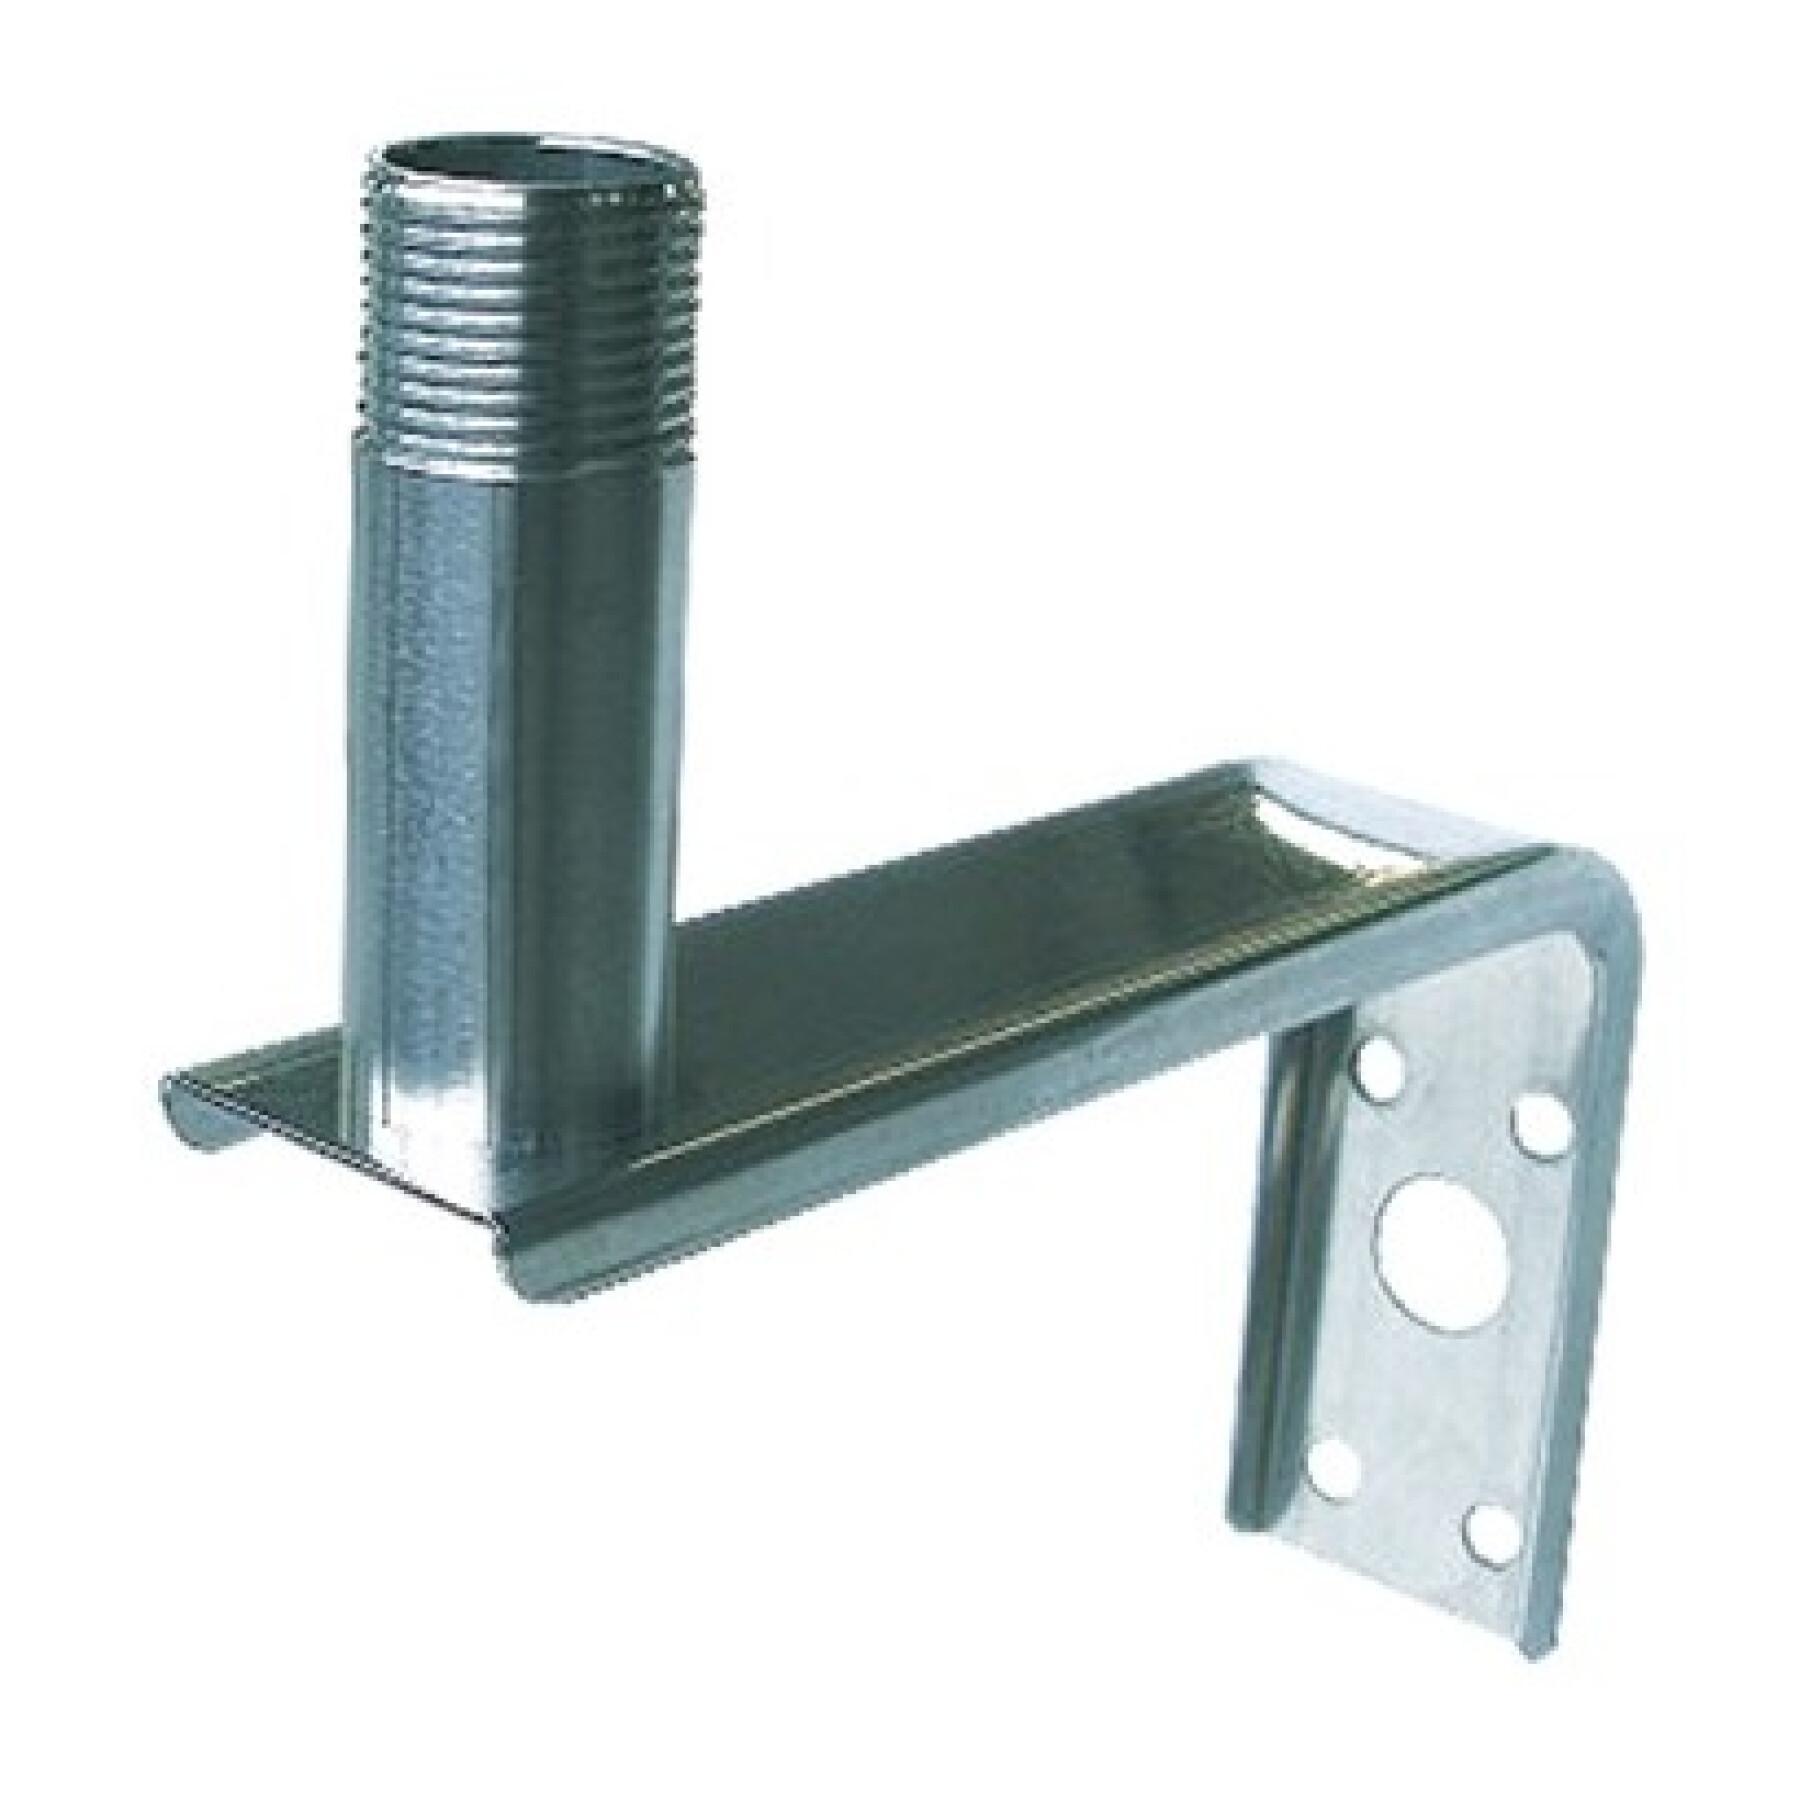 Stainless steel bracket for antenna mounting gps on vertical wall Banten 1"